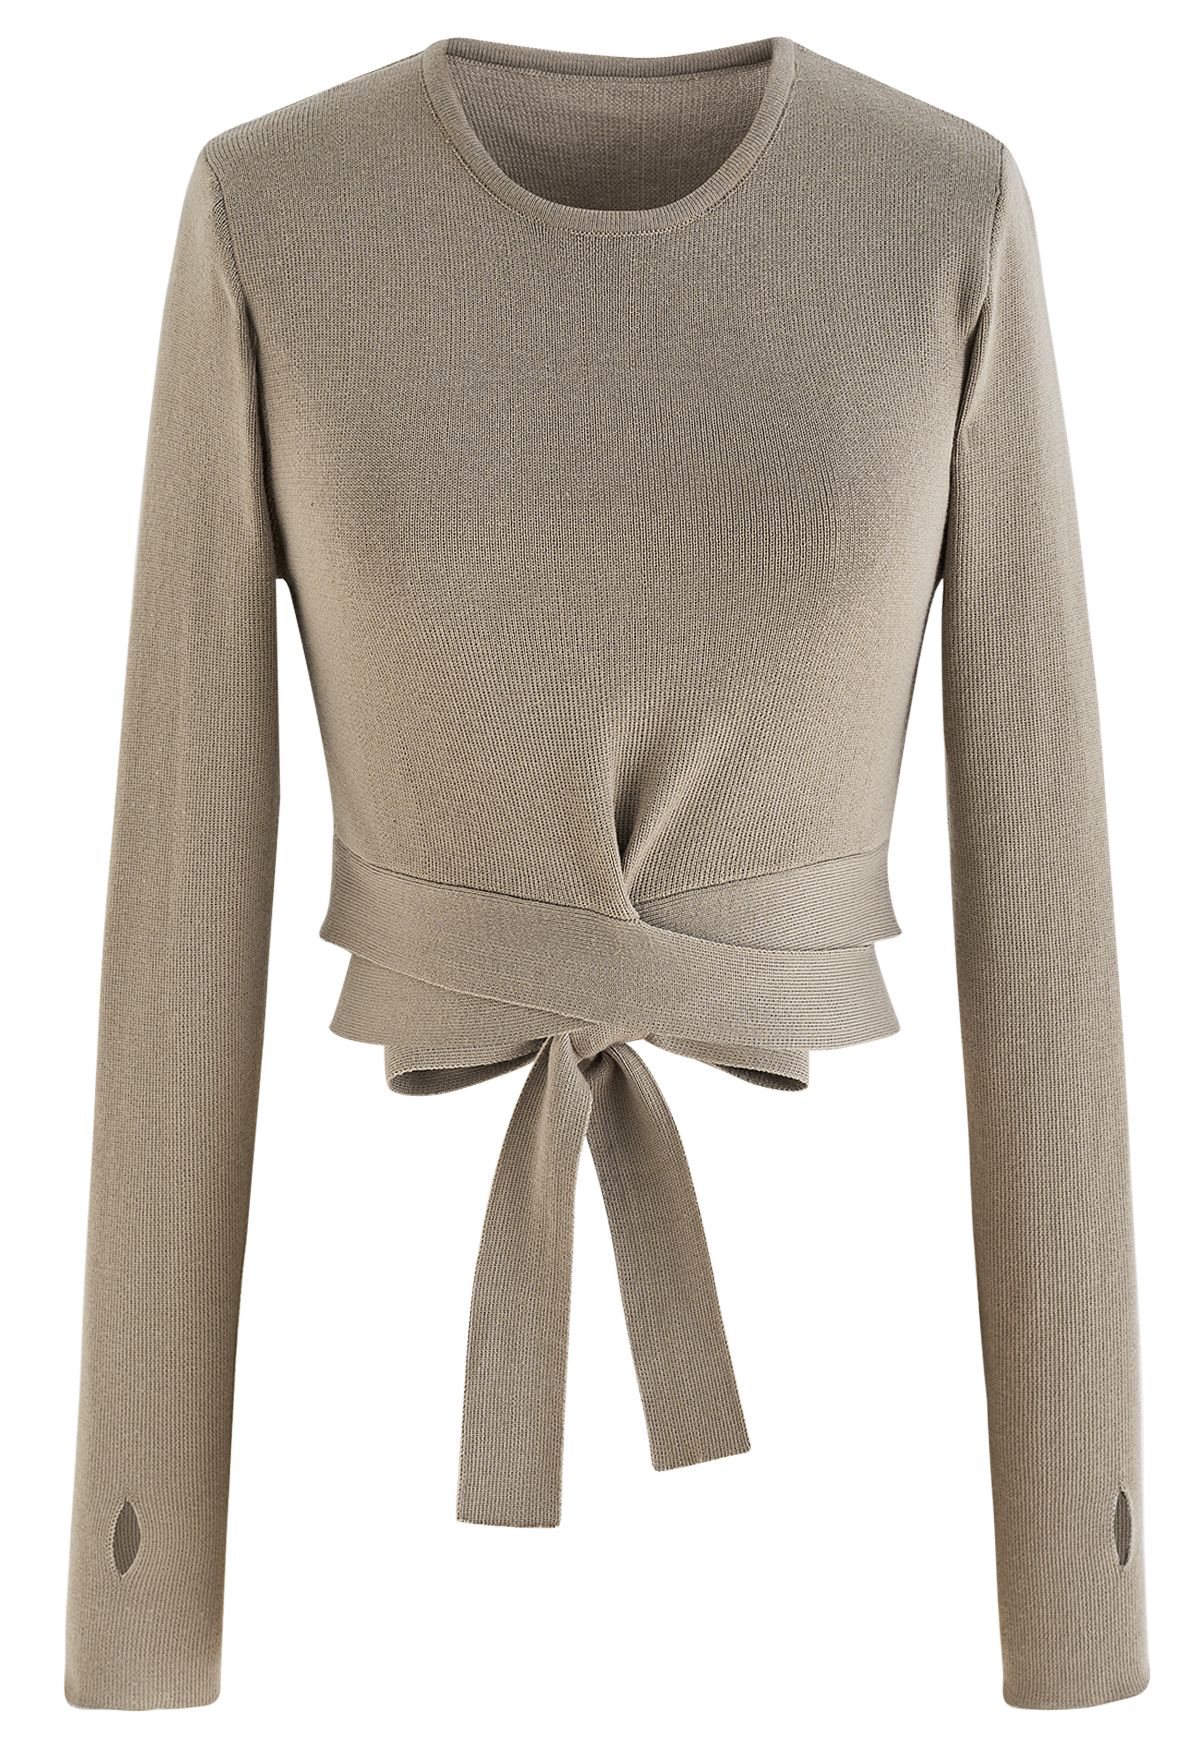 Self-Tie Bowknot Knit Crop Top in Taupe